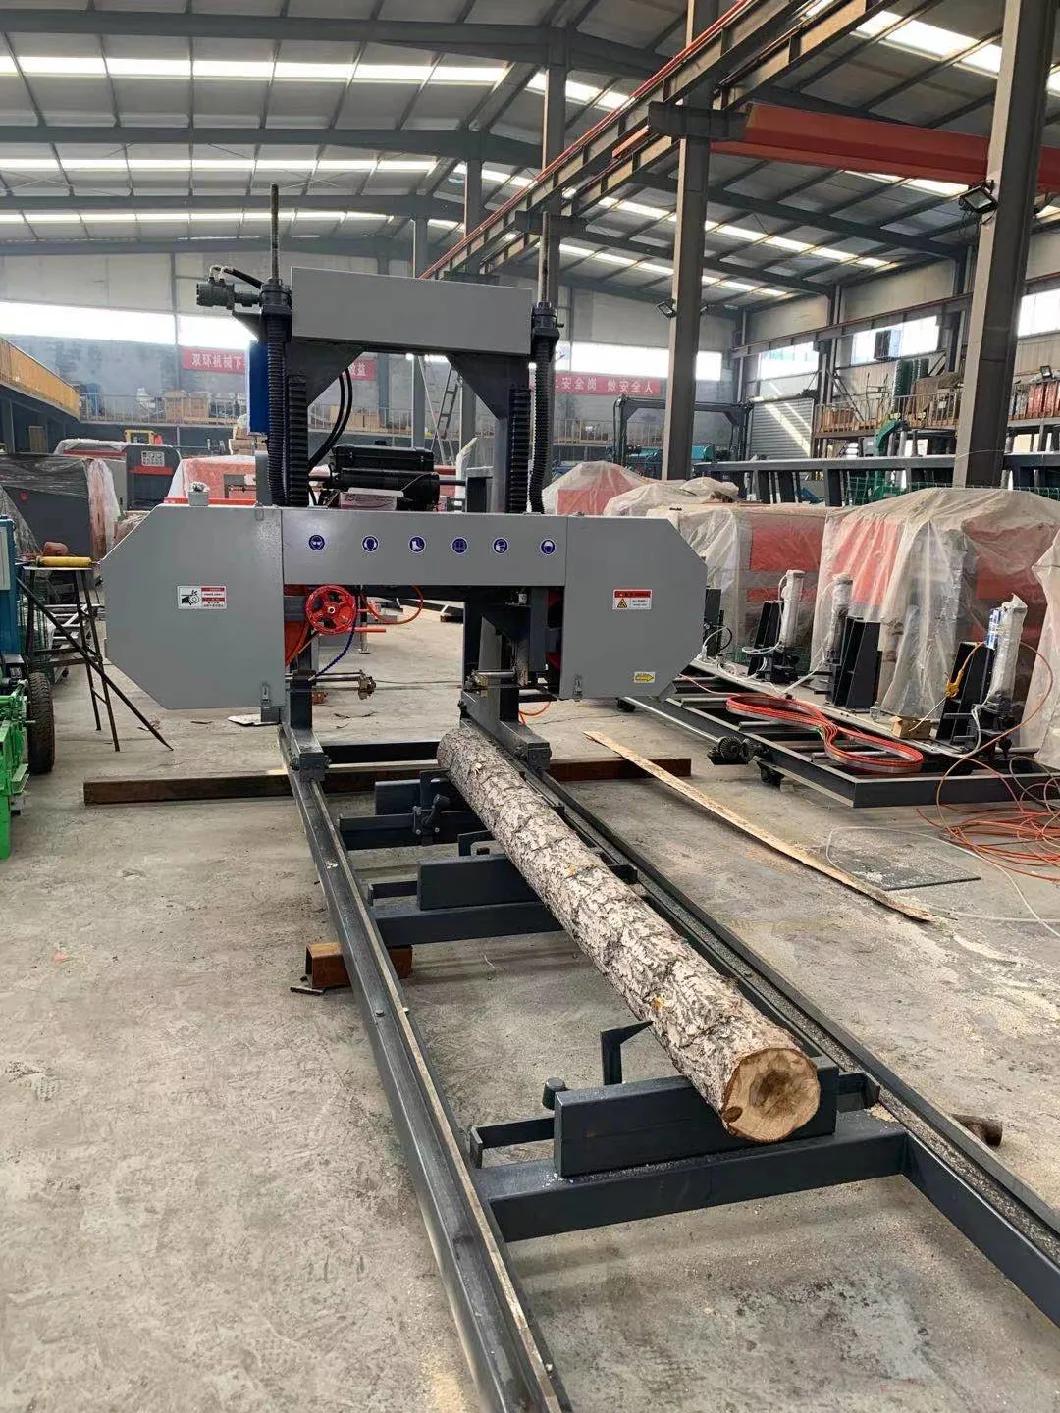 Best Sale Portable Band Sawmill for Sale Diesel Portable Band Saw Made in China